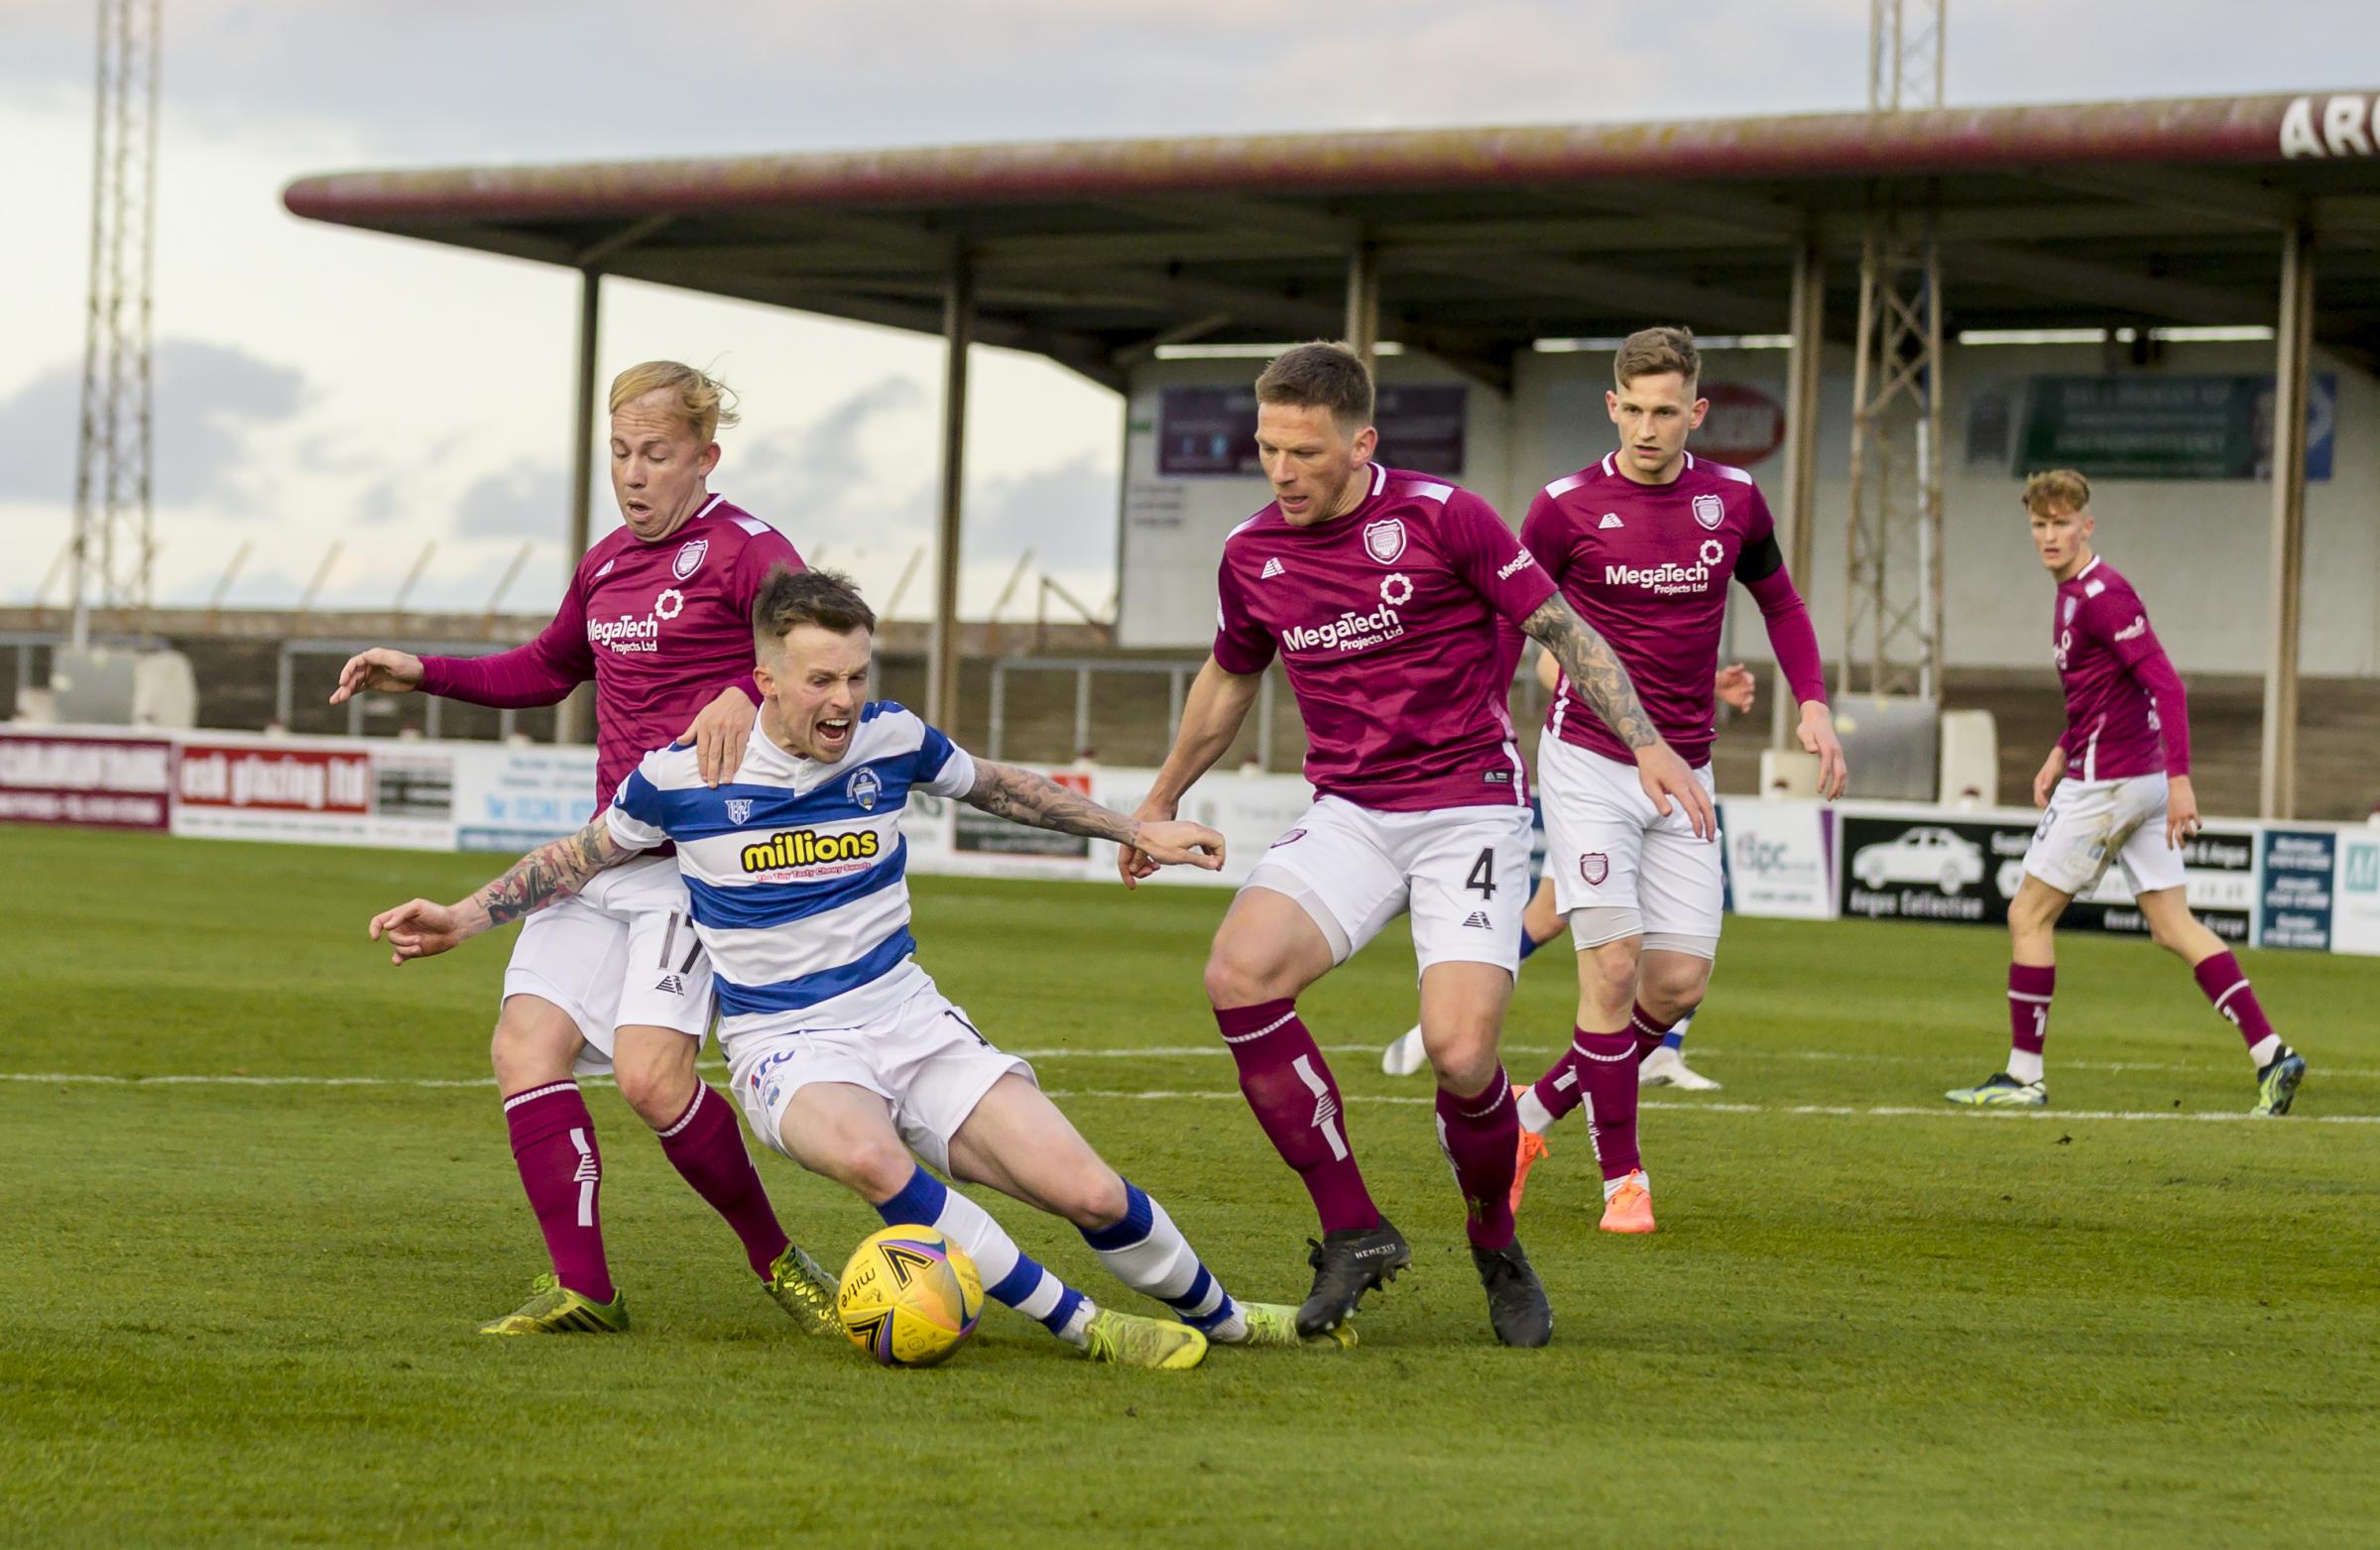 30.04.2021 Arbroath v Morton, SPFL Championship ..................... GARY OLIVER GOES DOWN UNDER CHALLENGE FROM NICKY LOW AND RICKY LITTLE BUT NO PENALTY.